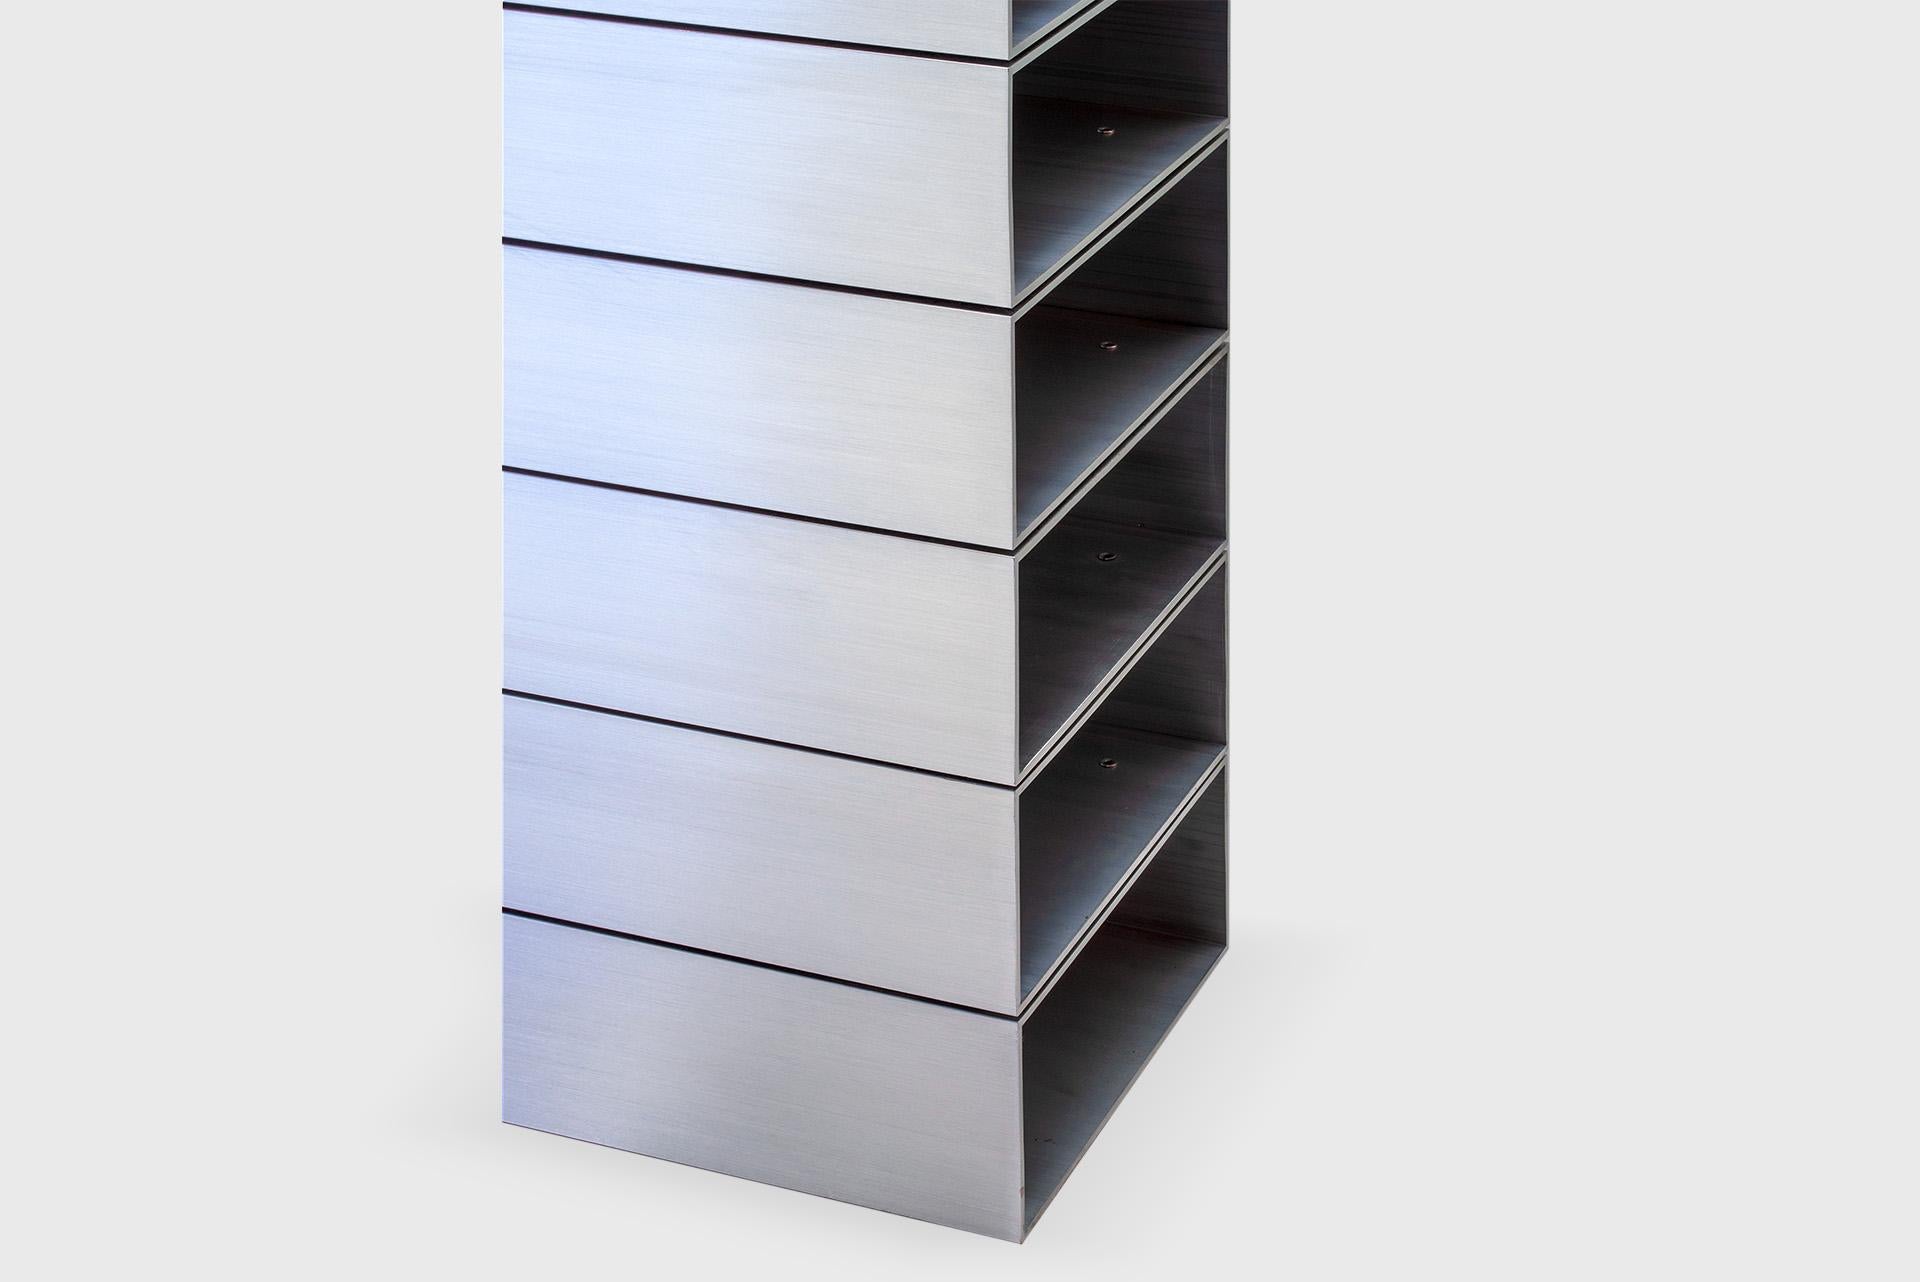 Shelf model “Stack”
Manufactured by Johan Viladrich
Montpellier, 2023.
Waxed Aluminium.

Measurements
60 x 30 x 125h cm
23,6 x 11,8 x 49,2h in

Exhibitions
Casavells 2023.

Concept
In this series of new pieces, Viladrich seeks to